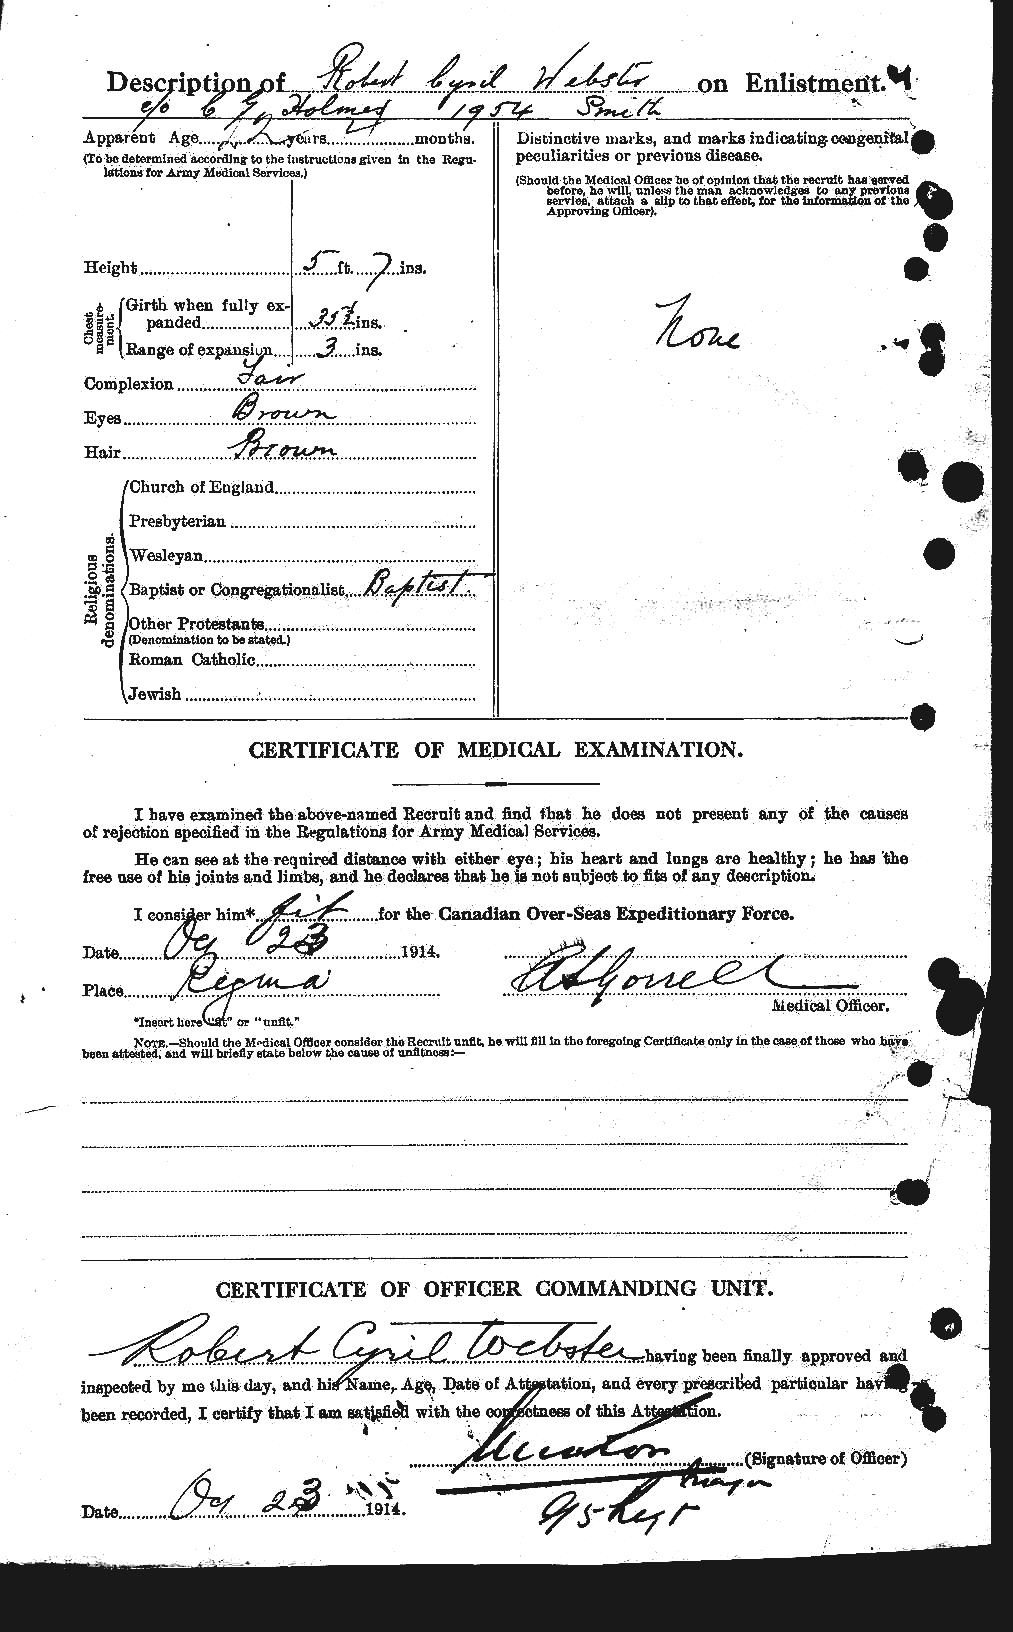 Personnel Records of the First World War - CEF 661961b